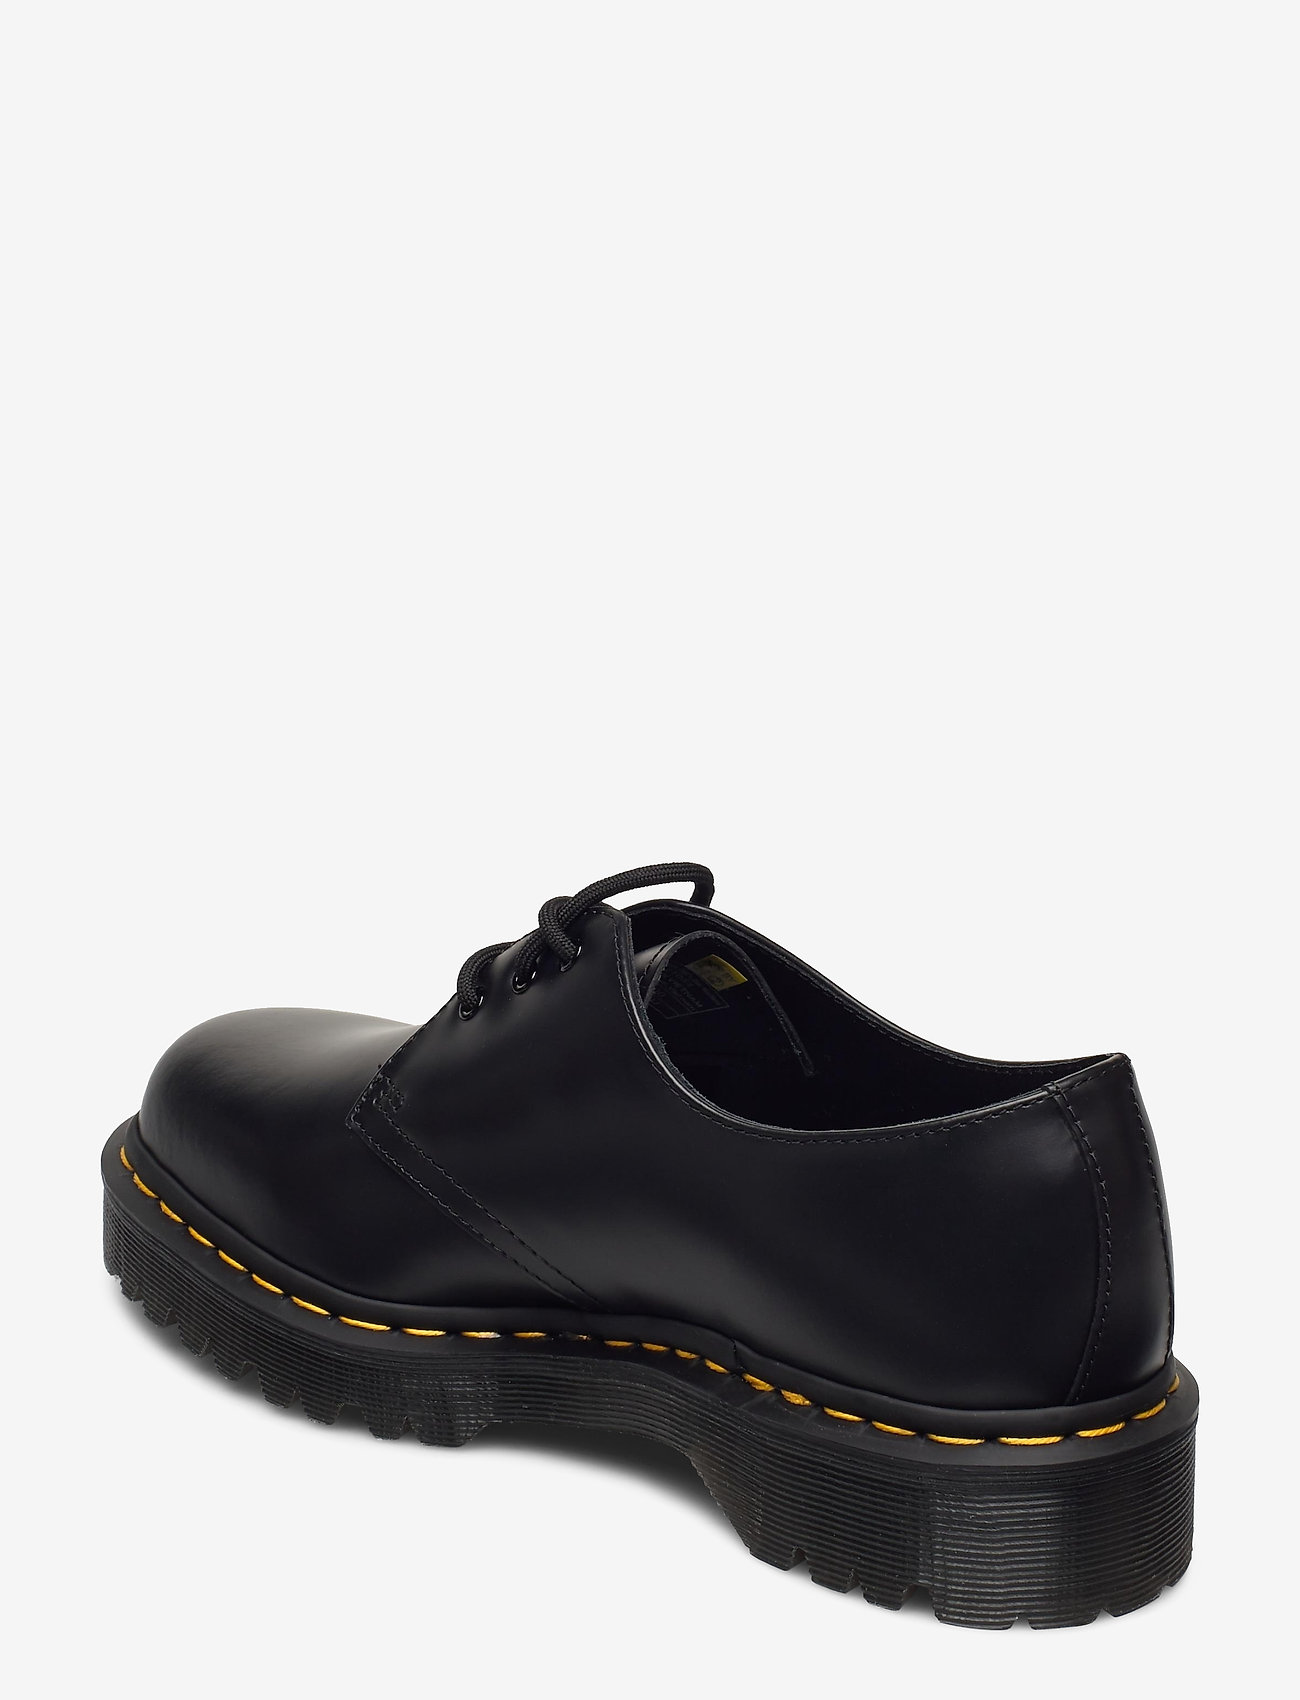 Dr. Martens - 1461 Bex Black Smooth - chaussures oxford - black - 1